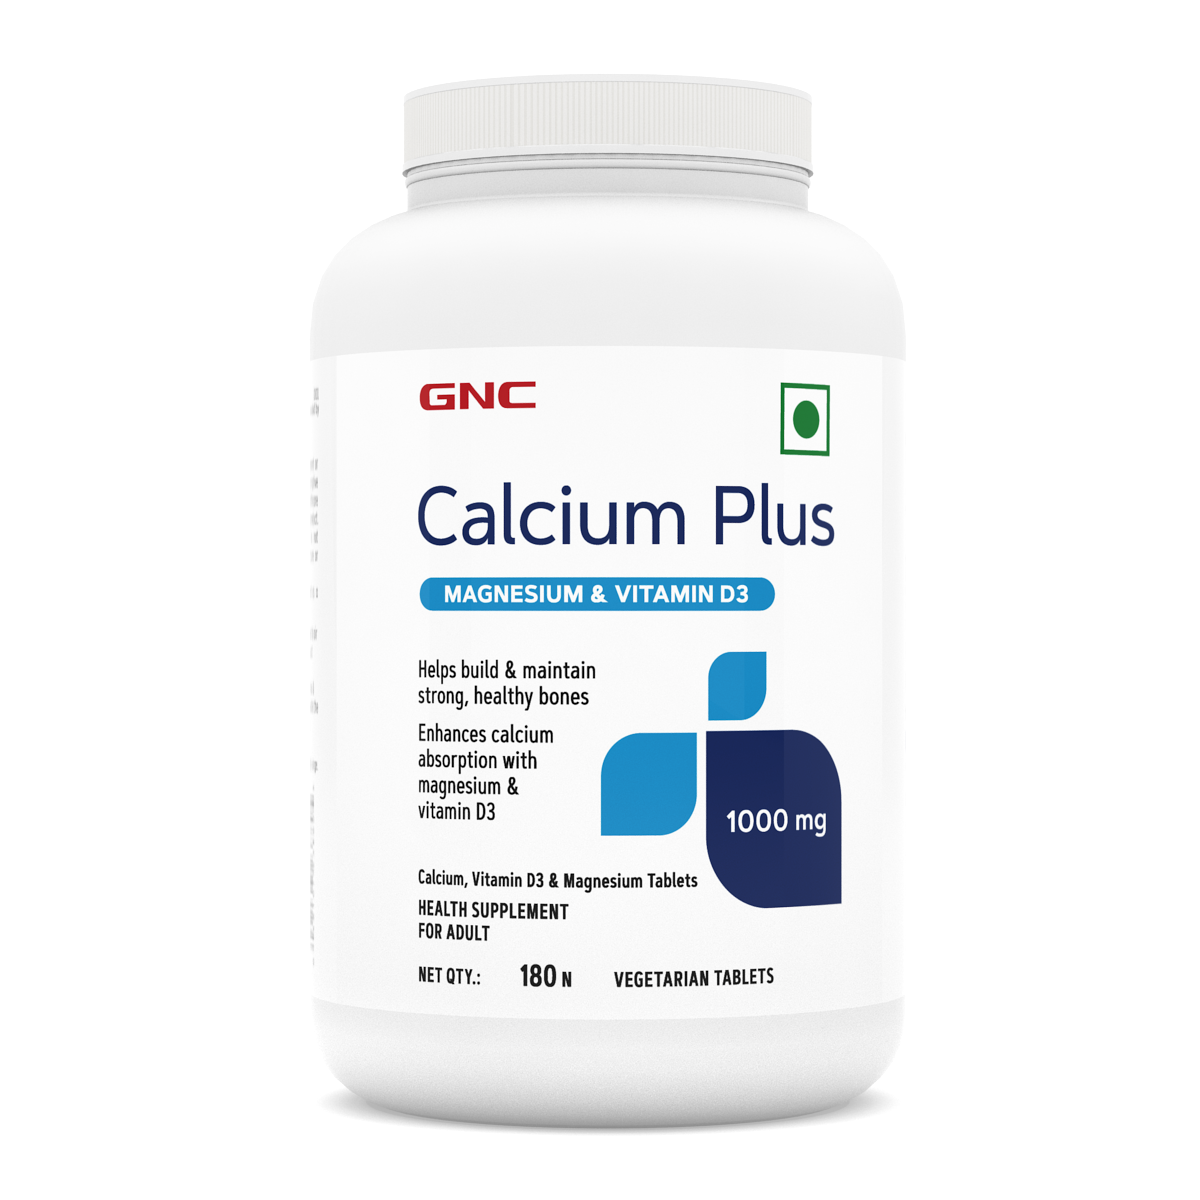 GNC Calcium Plus 1000mg with Magnesium and Vitamin D3 - Promotes Healthy & Strong Bones